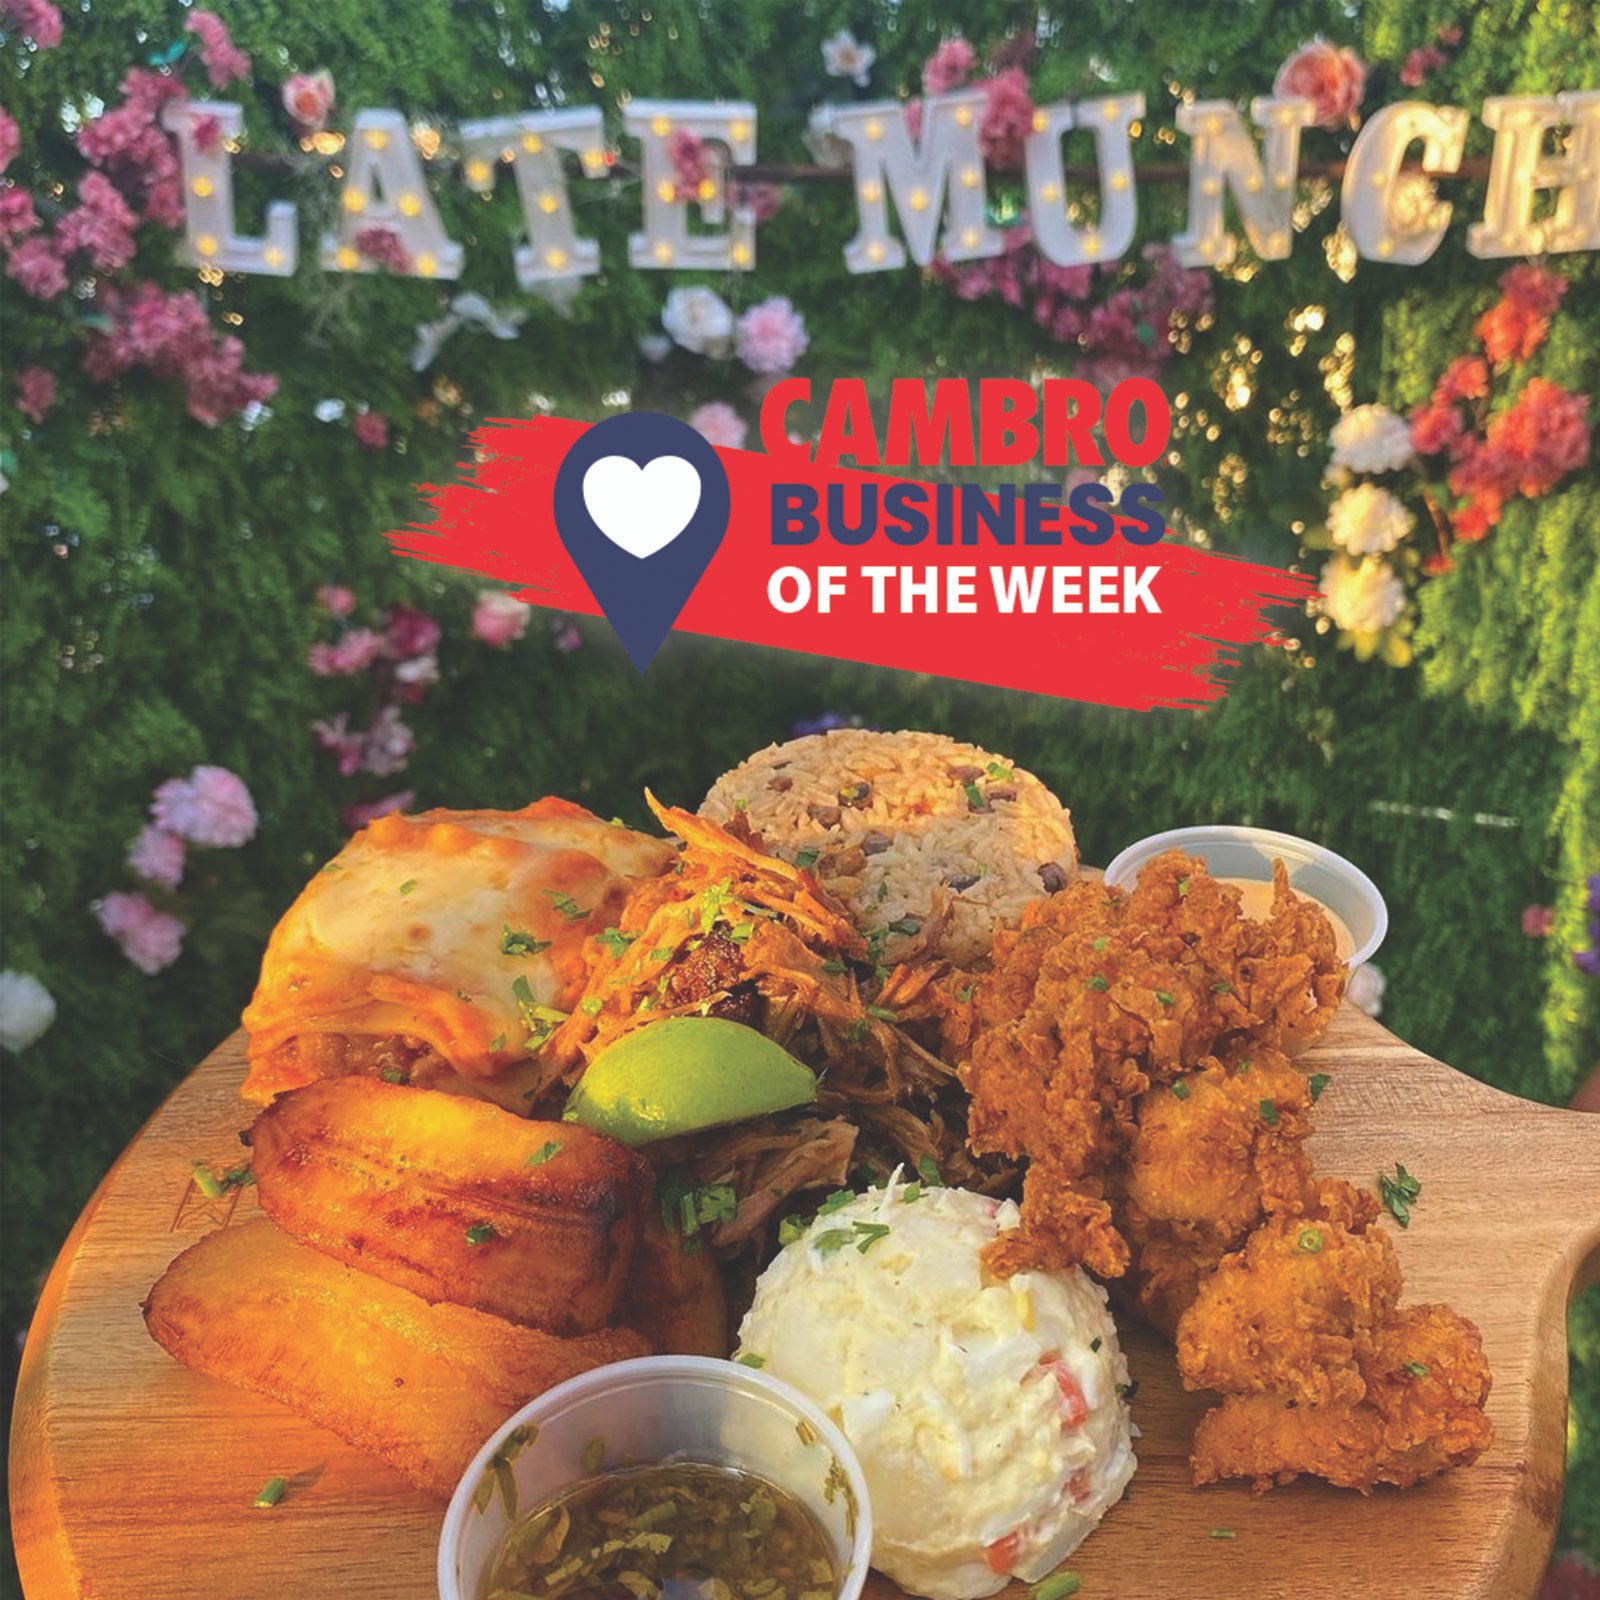 Cambro’s Business of the Week: LateMunch